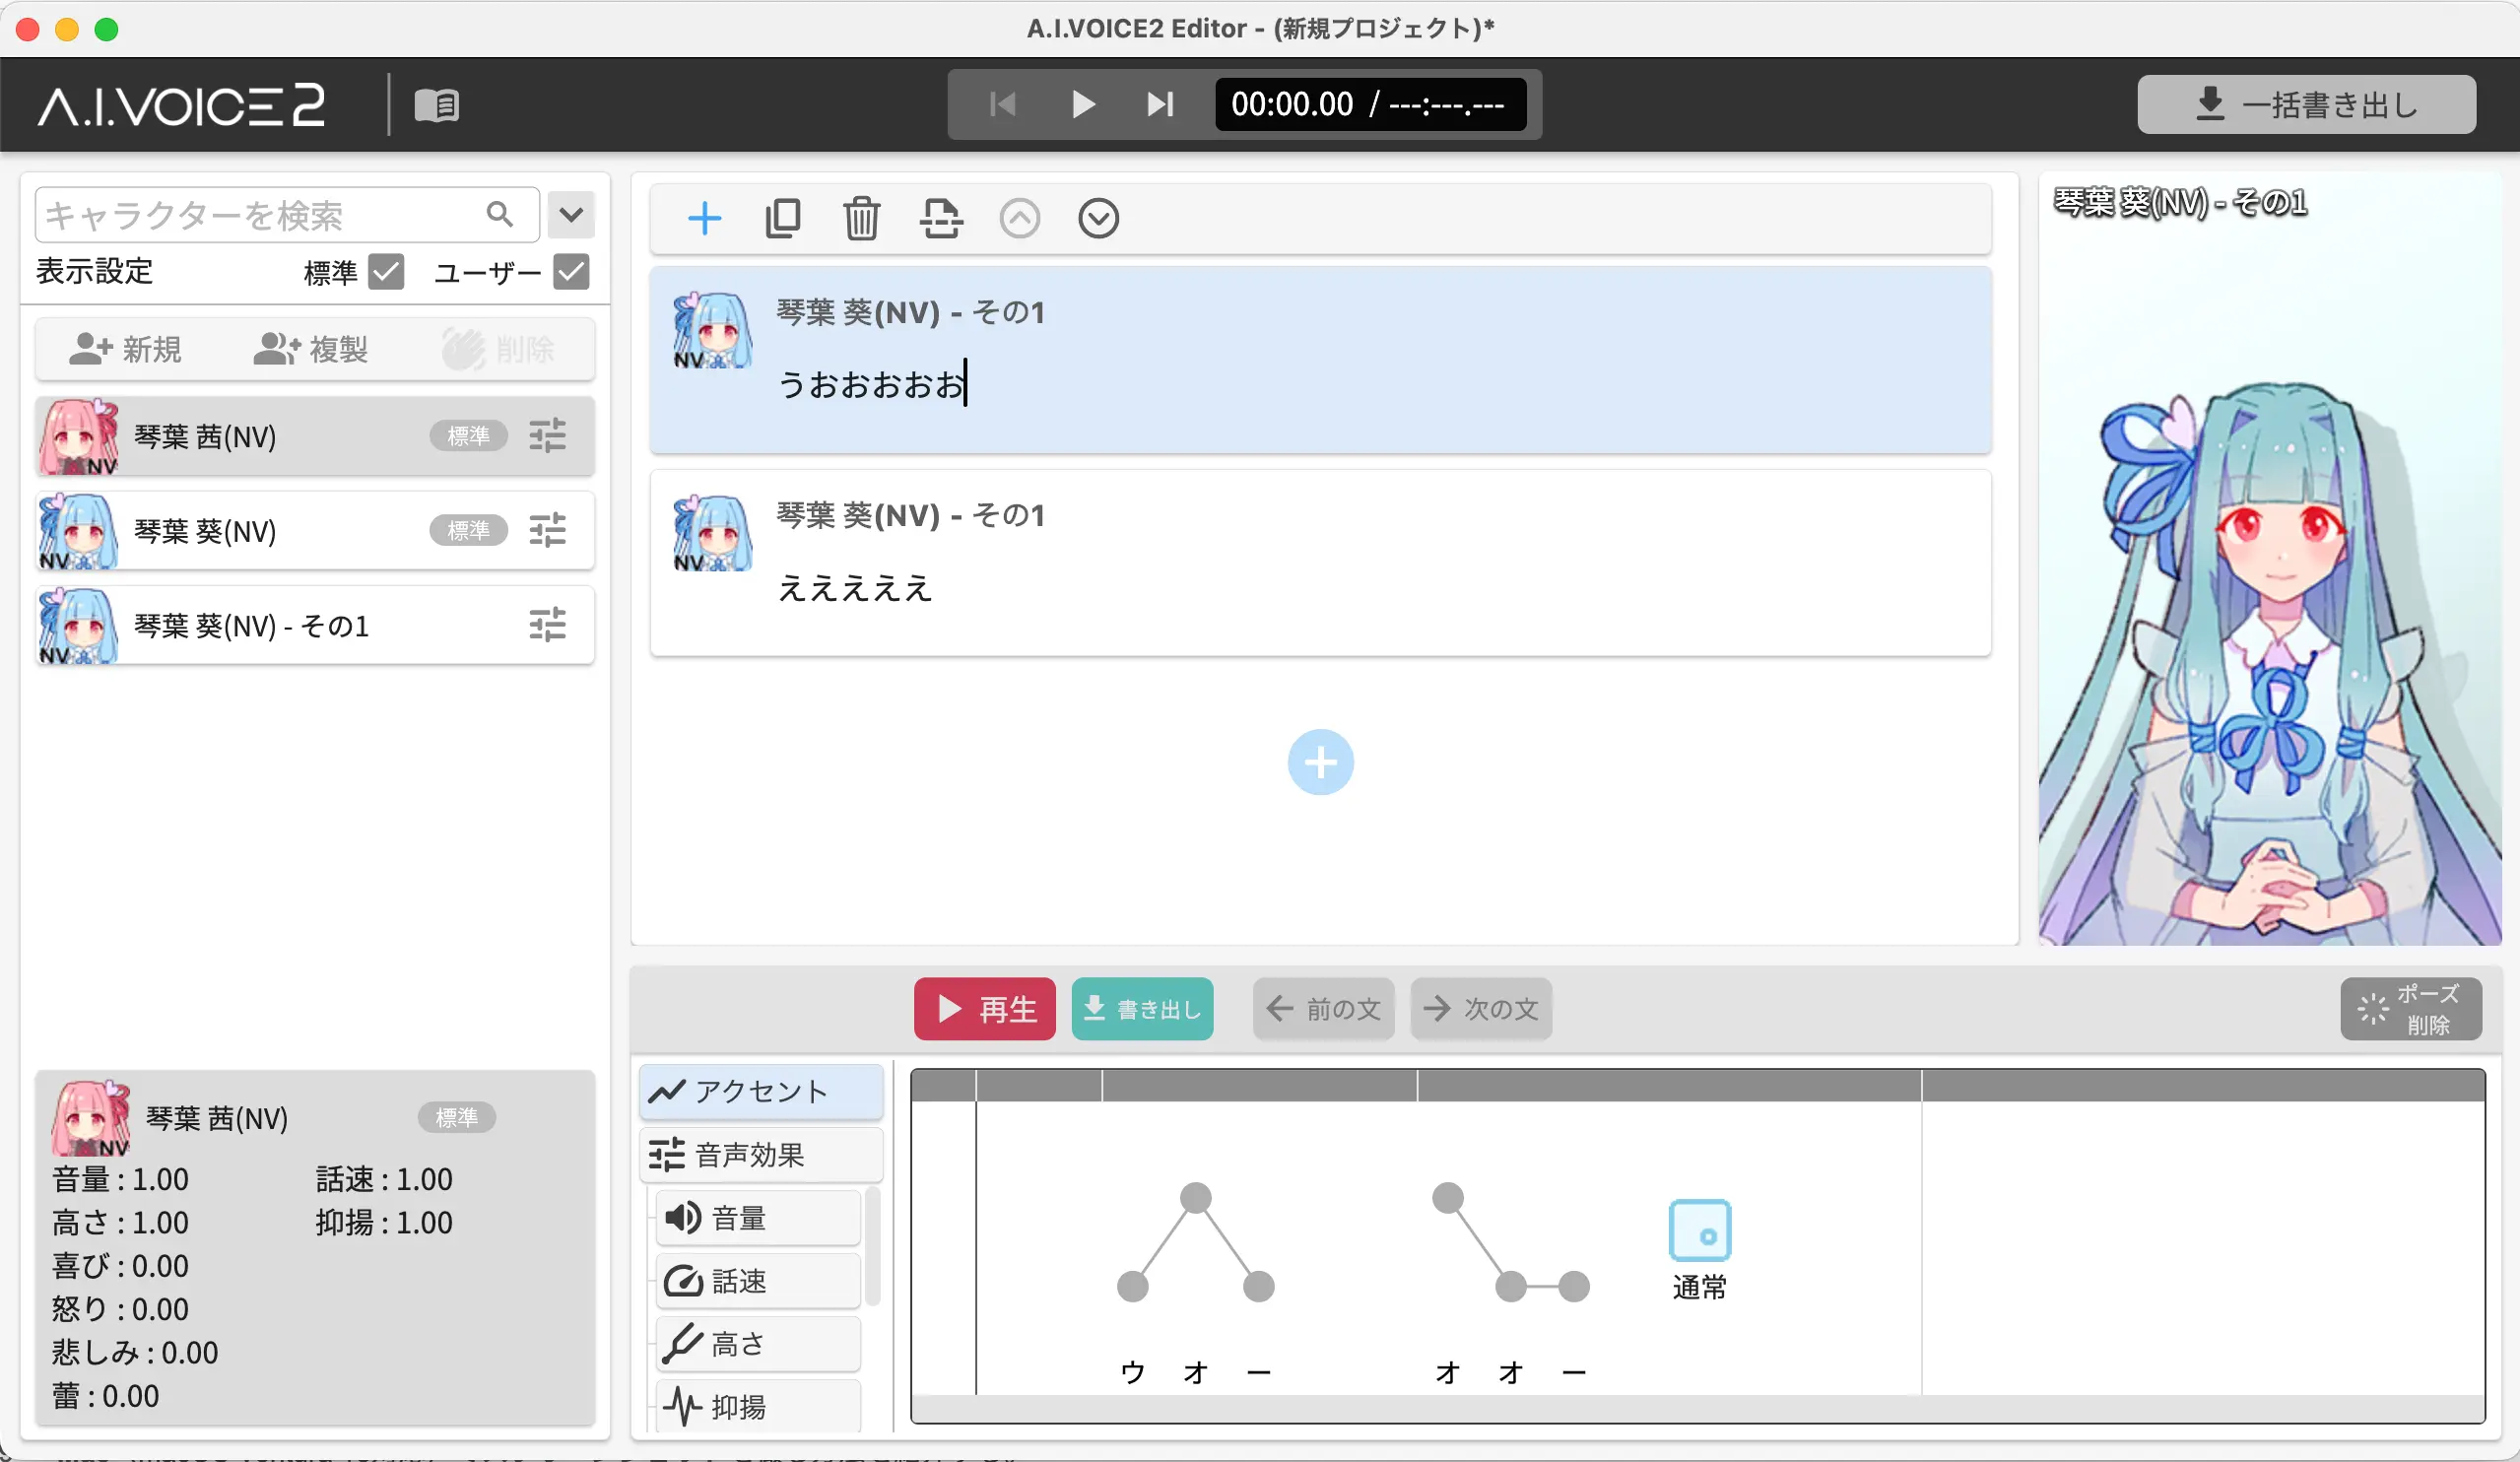 AoiSupport for Mac -音声合成ソフトを利用した動画制作の支援ツール-